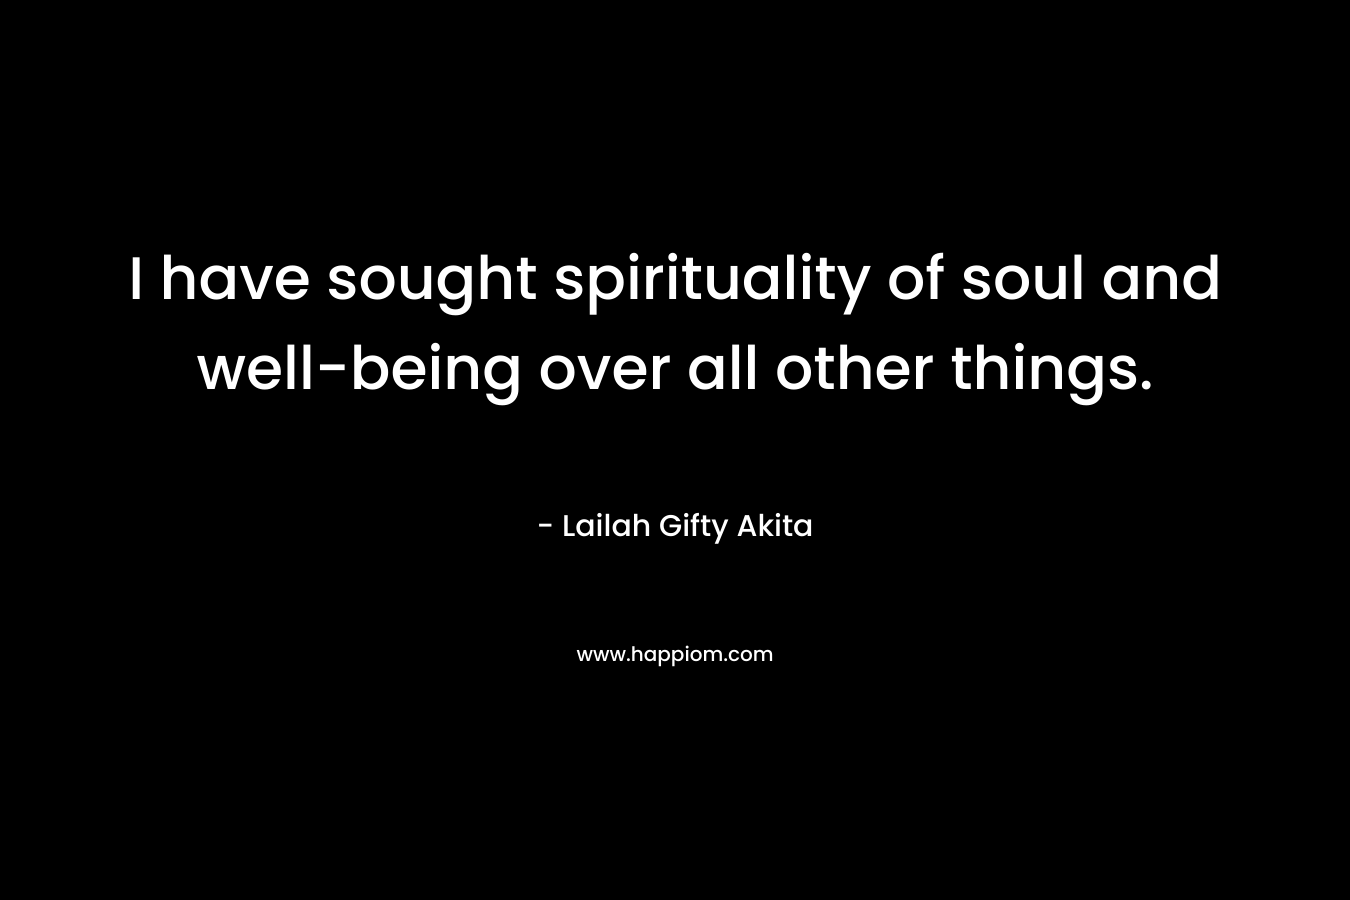 I have sought spirituality of soul and well-being over all other things. – Lailah Gifty Akita